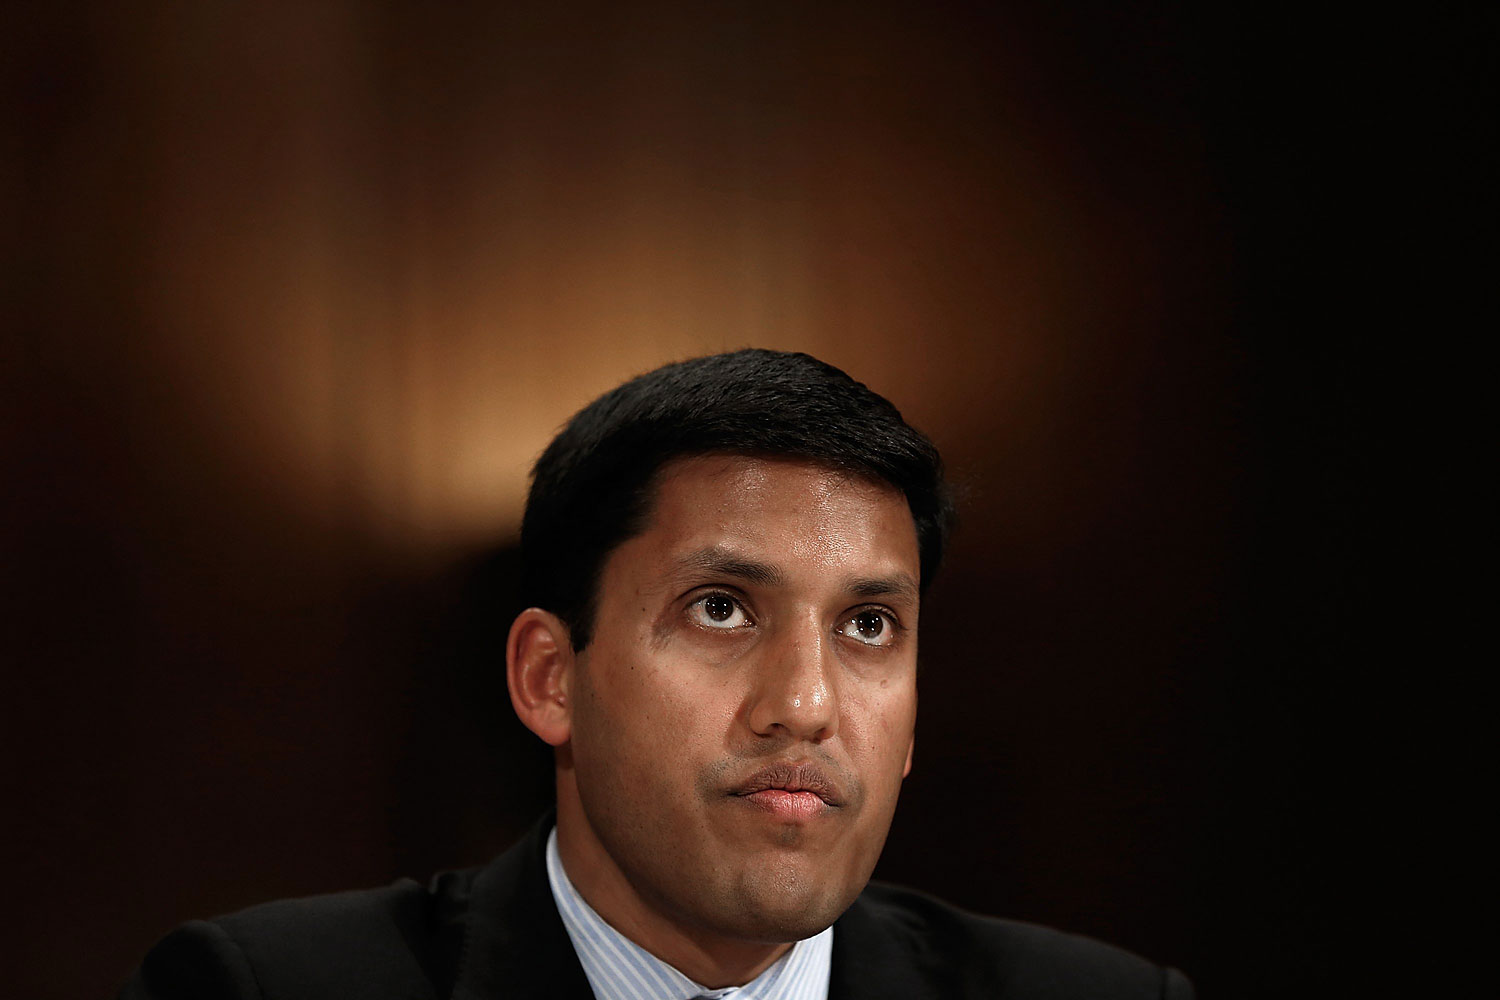 Rajiv Shah, administrator of the U.S. Agency for International Development testifies before a subcommittee of the Senate Appropriations Committee April 8, 2014 in Washington, DC.